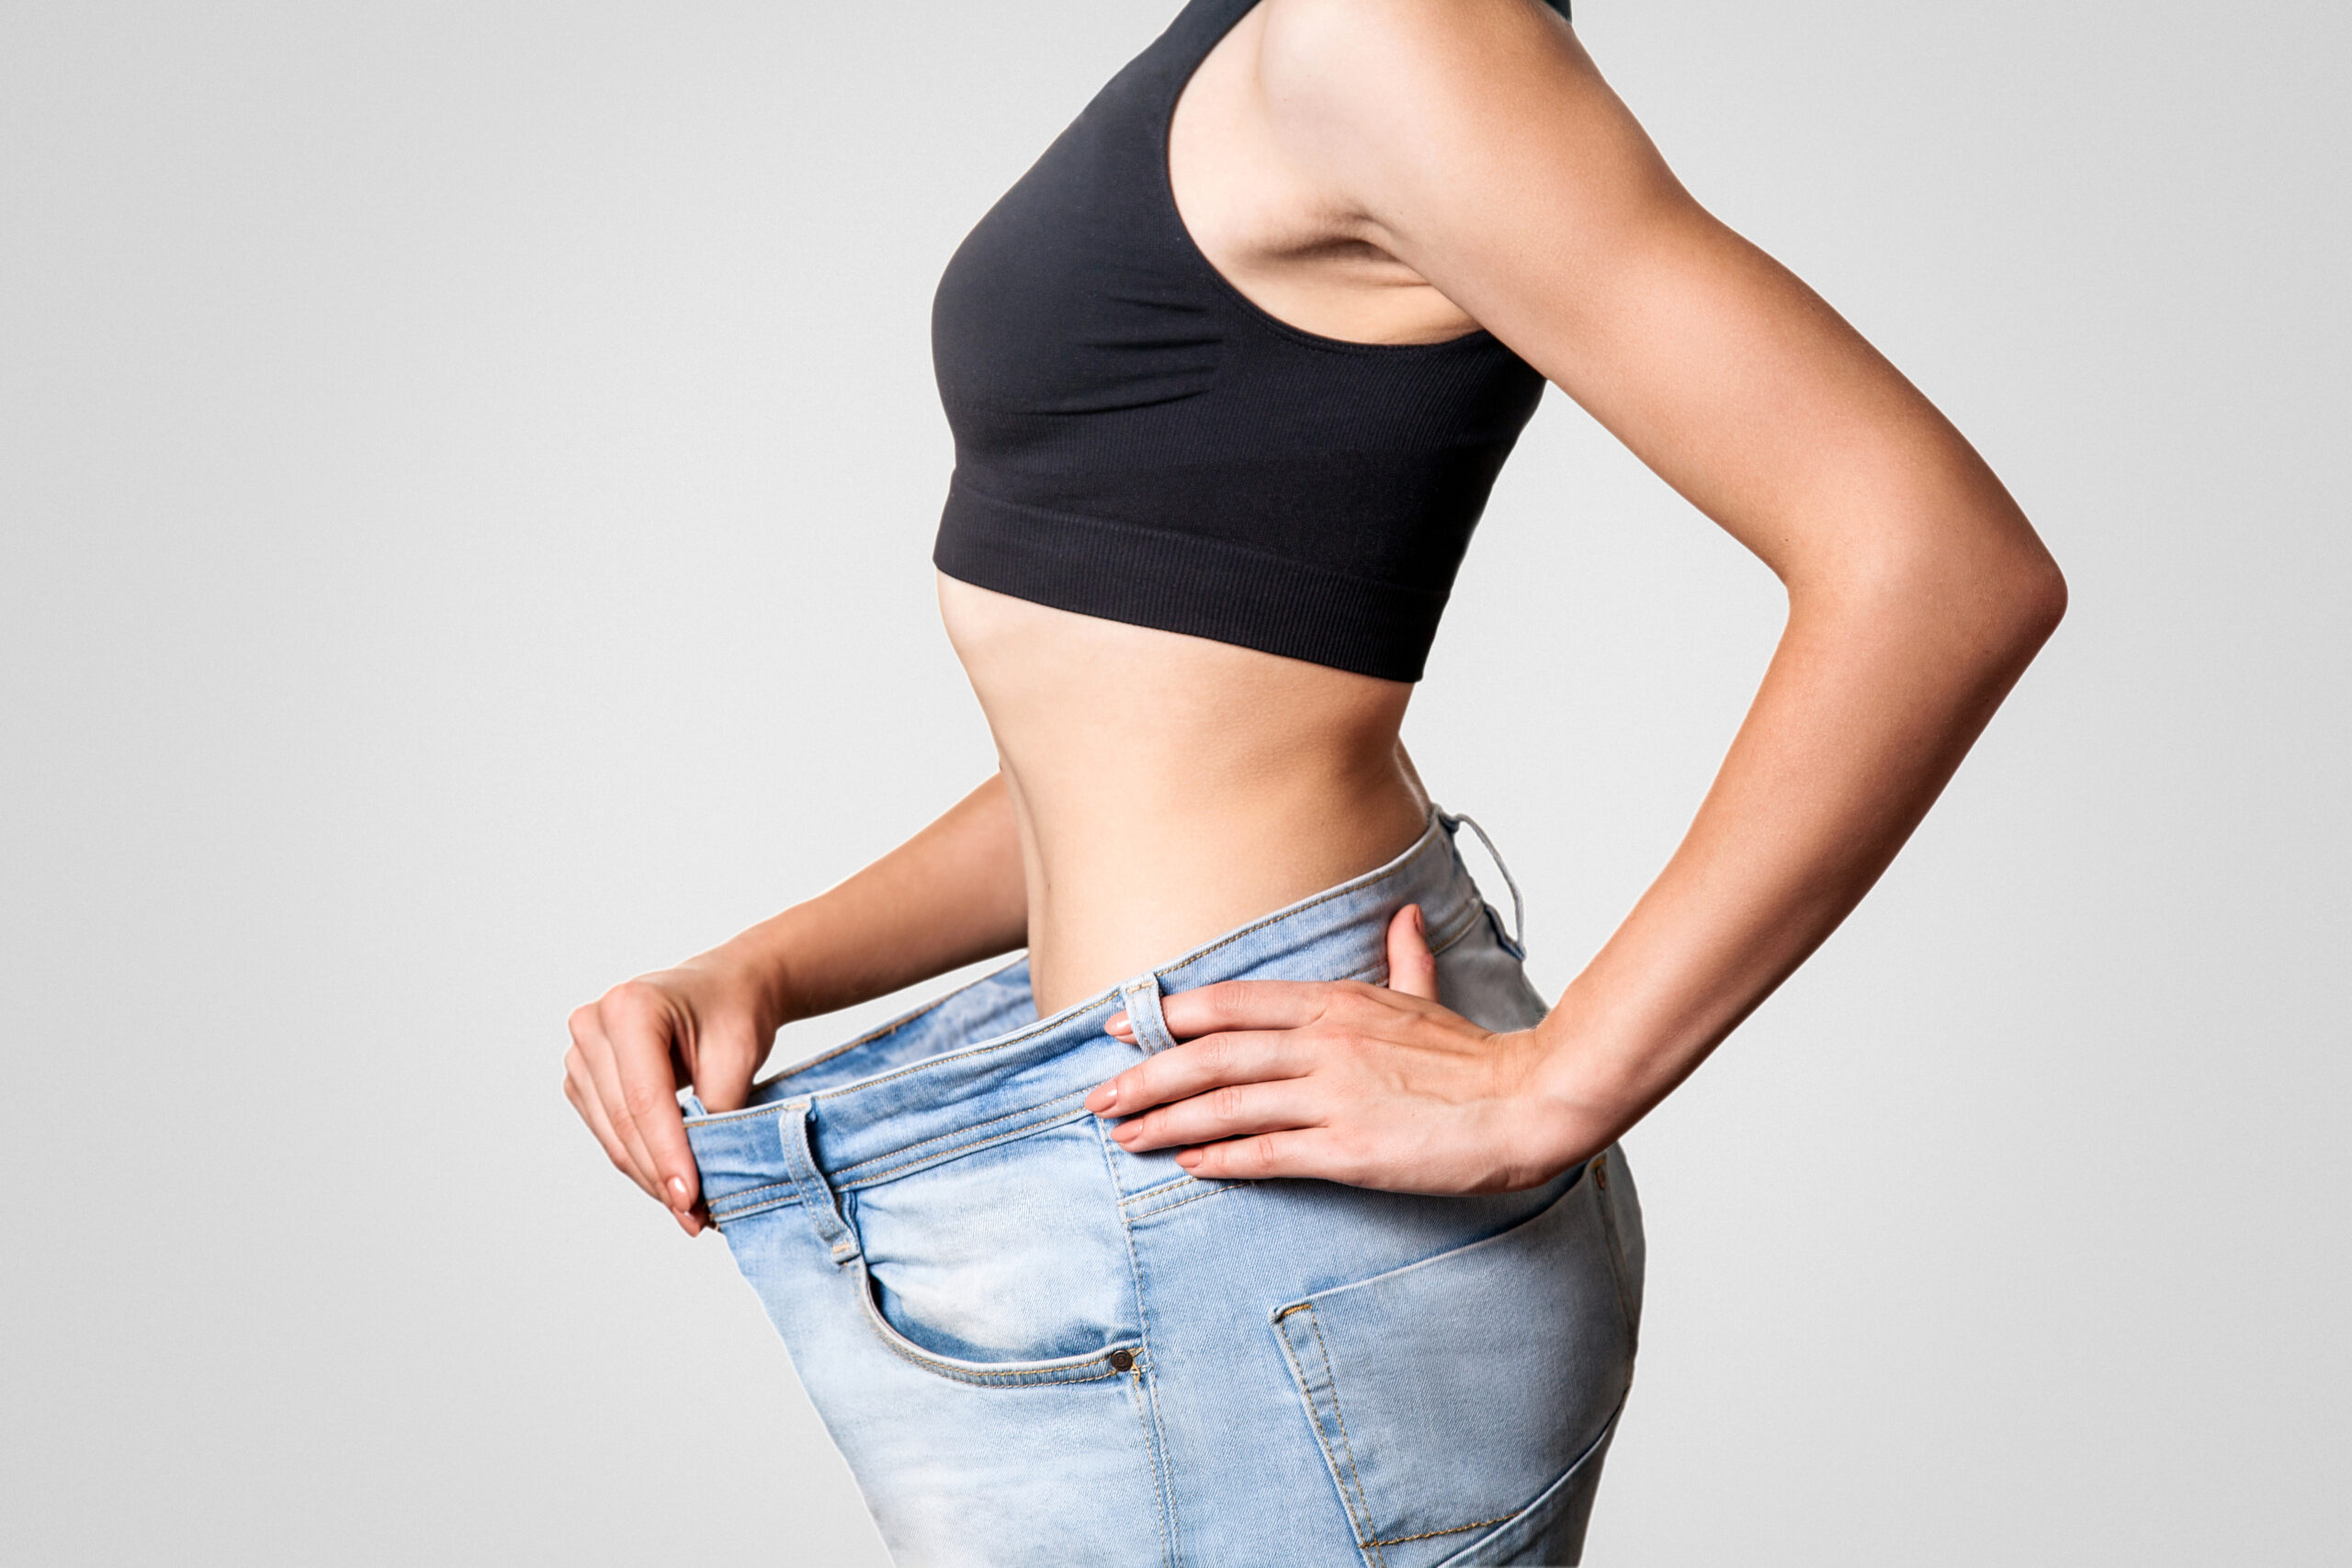 Loose Stomach Skin Treatment: Tighten and Firm Your Stomach